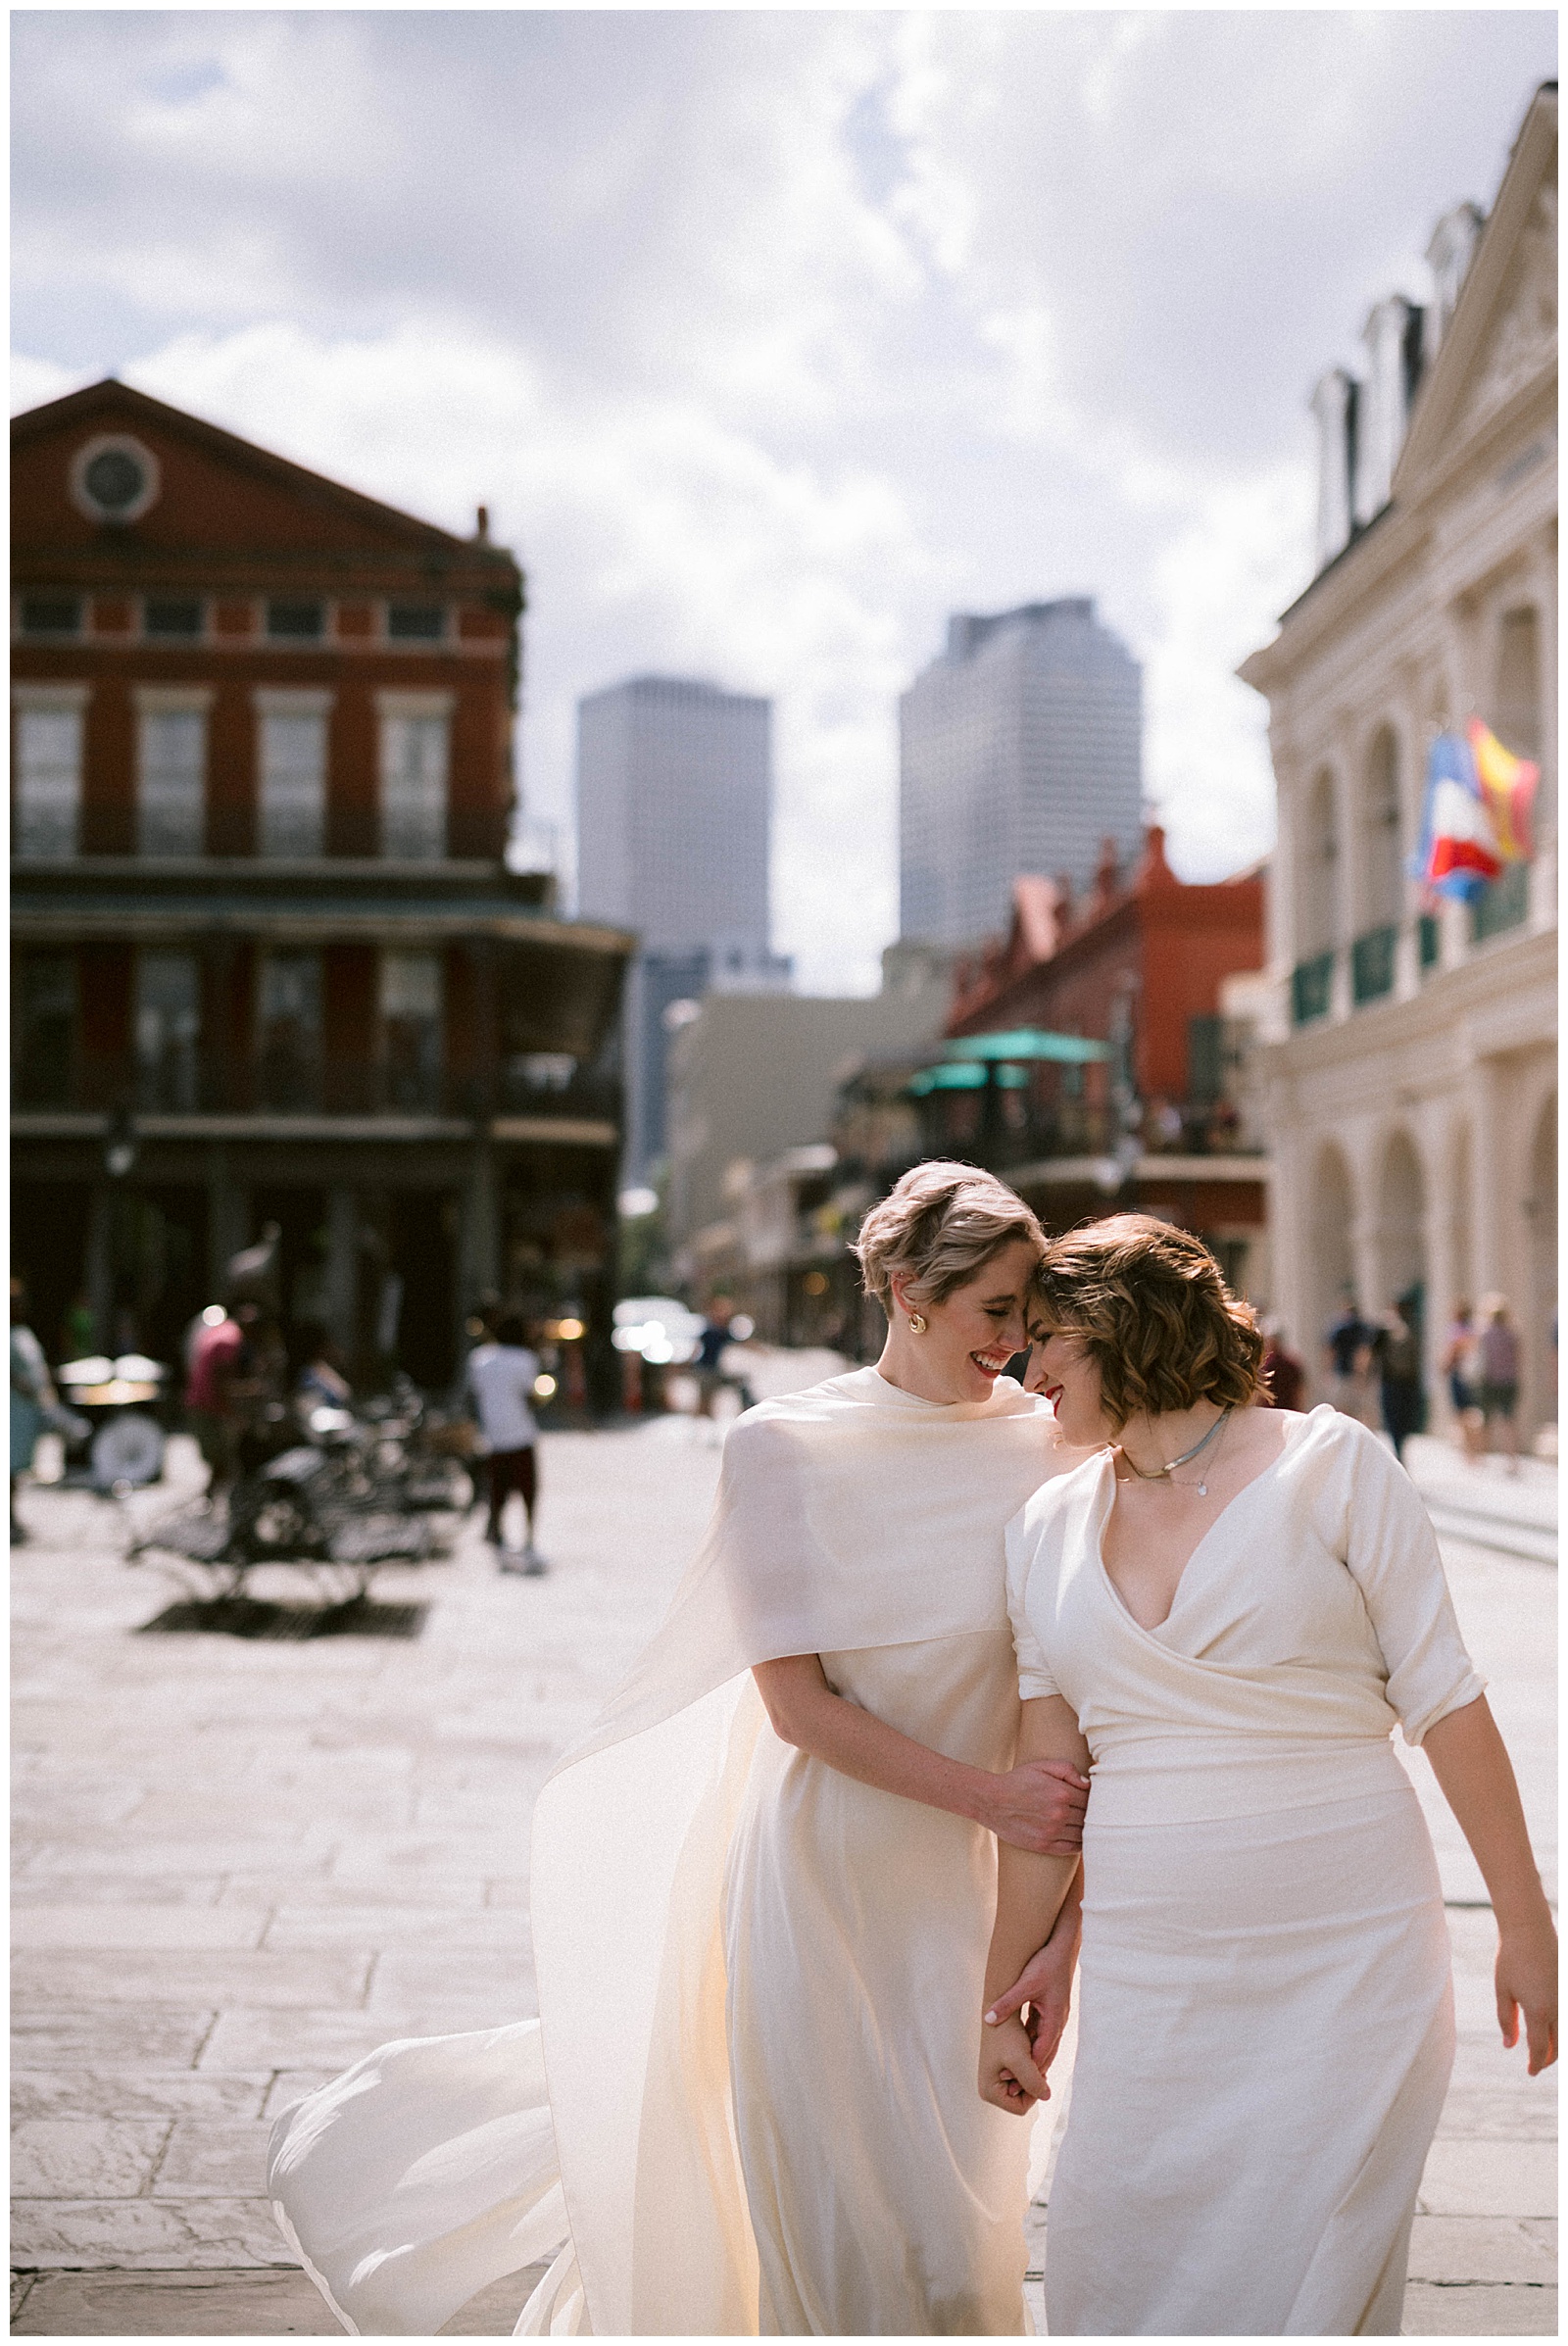 A marrier wears a cape at a French Quarter wedding